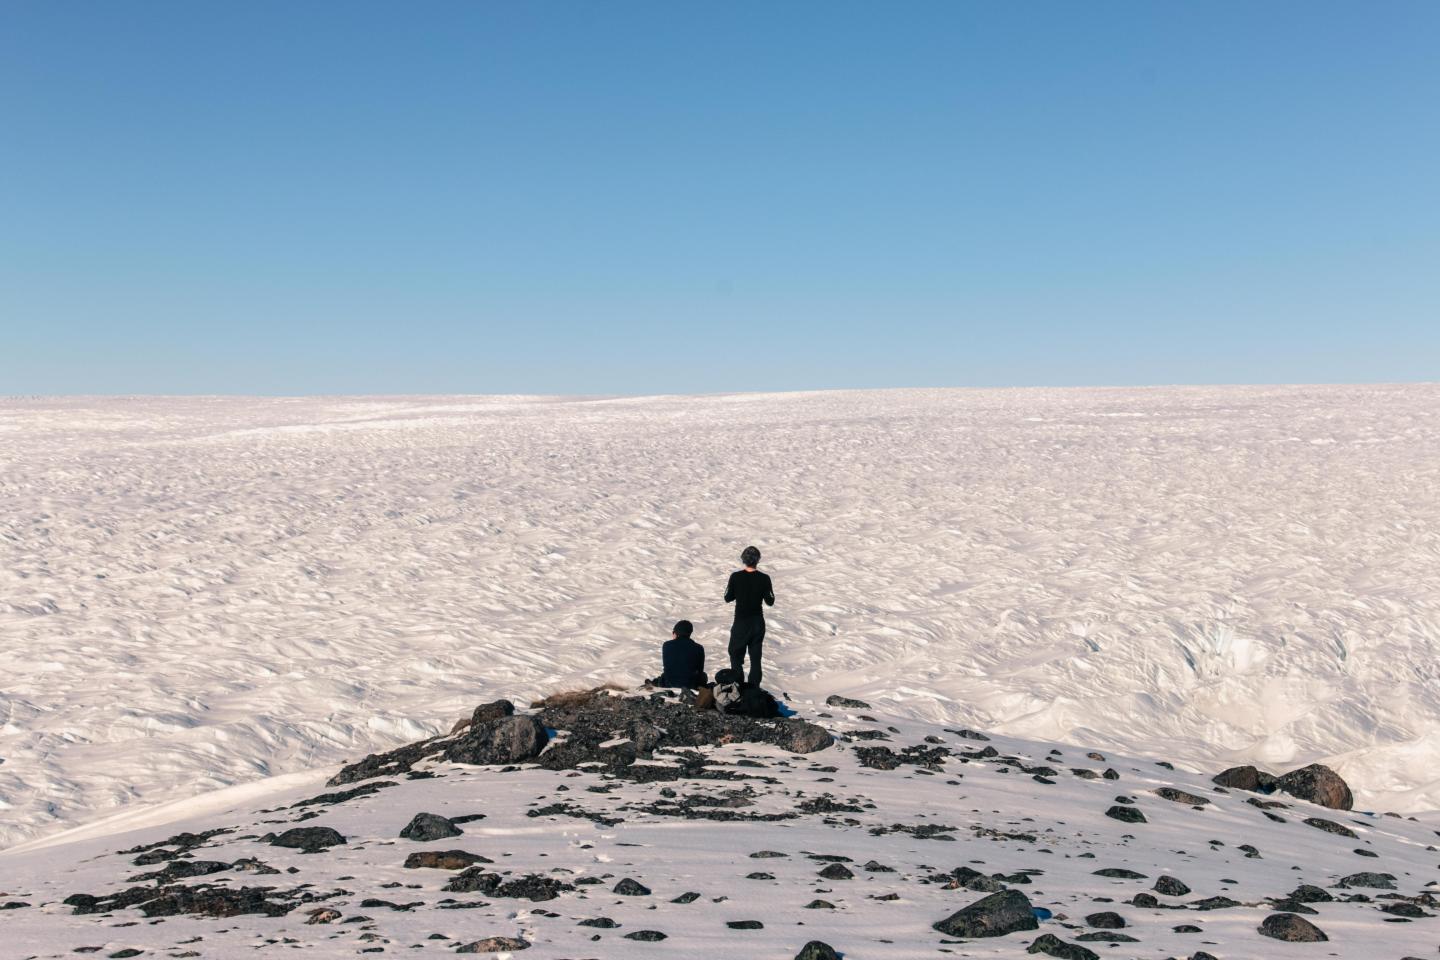 Researchers from the Bristol Glaciology Centre Look Over the Vast Greenland Ice Sheet